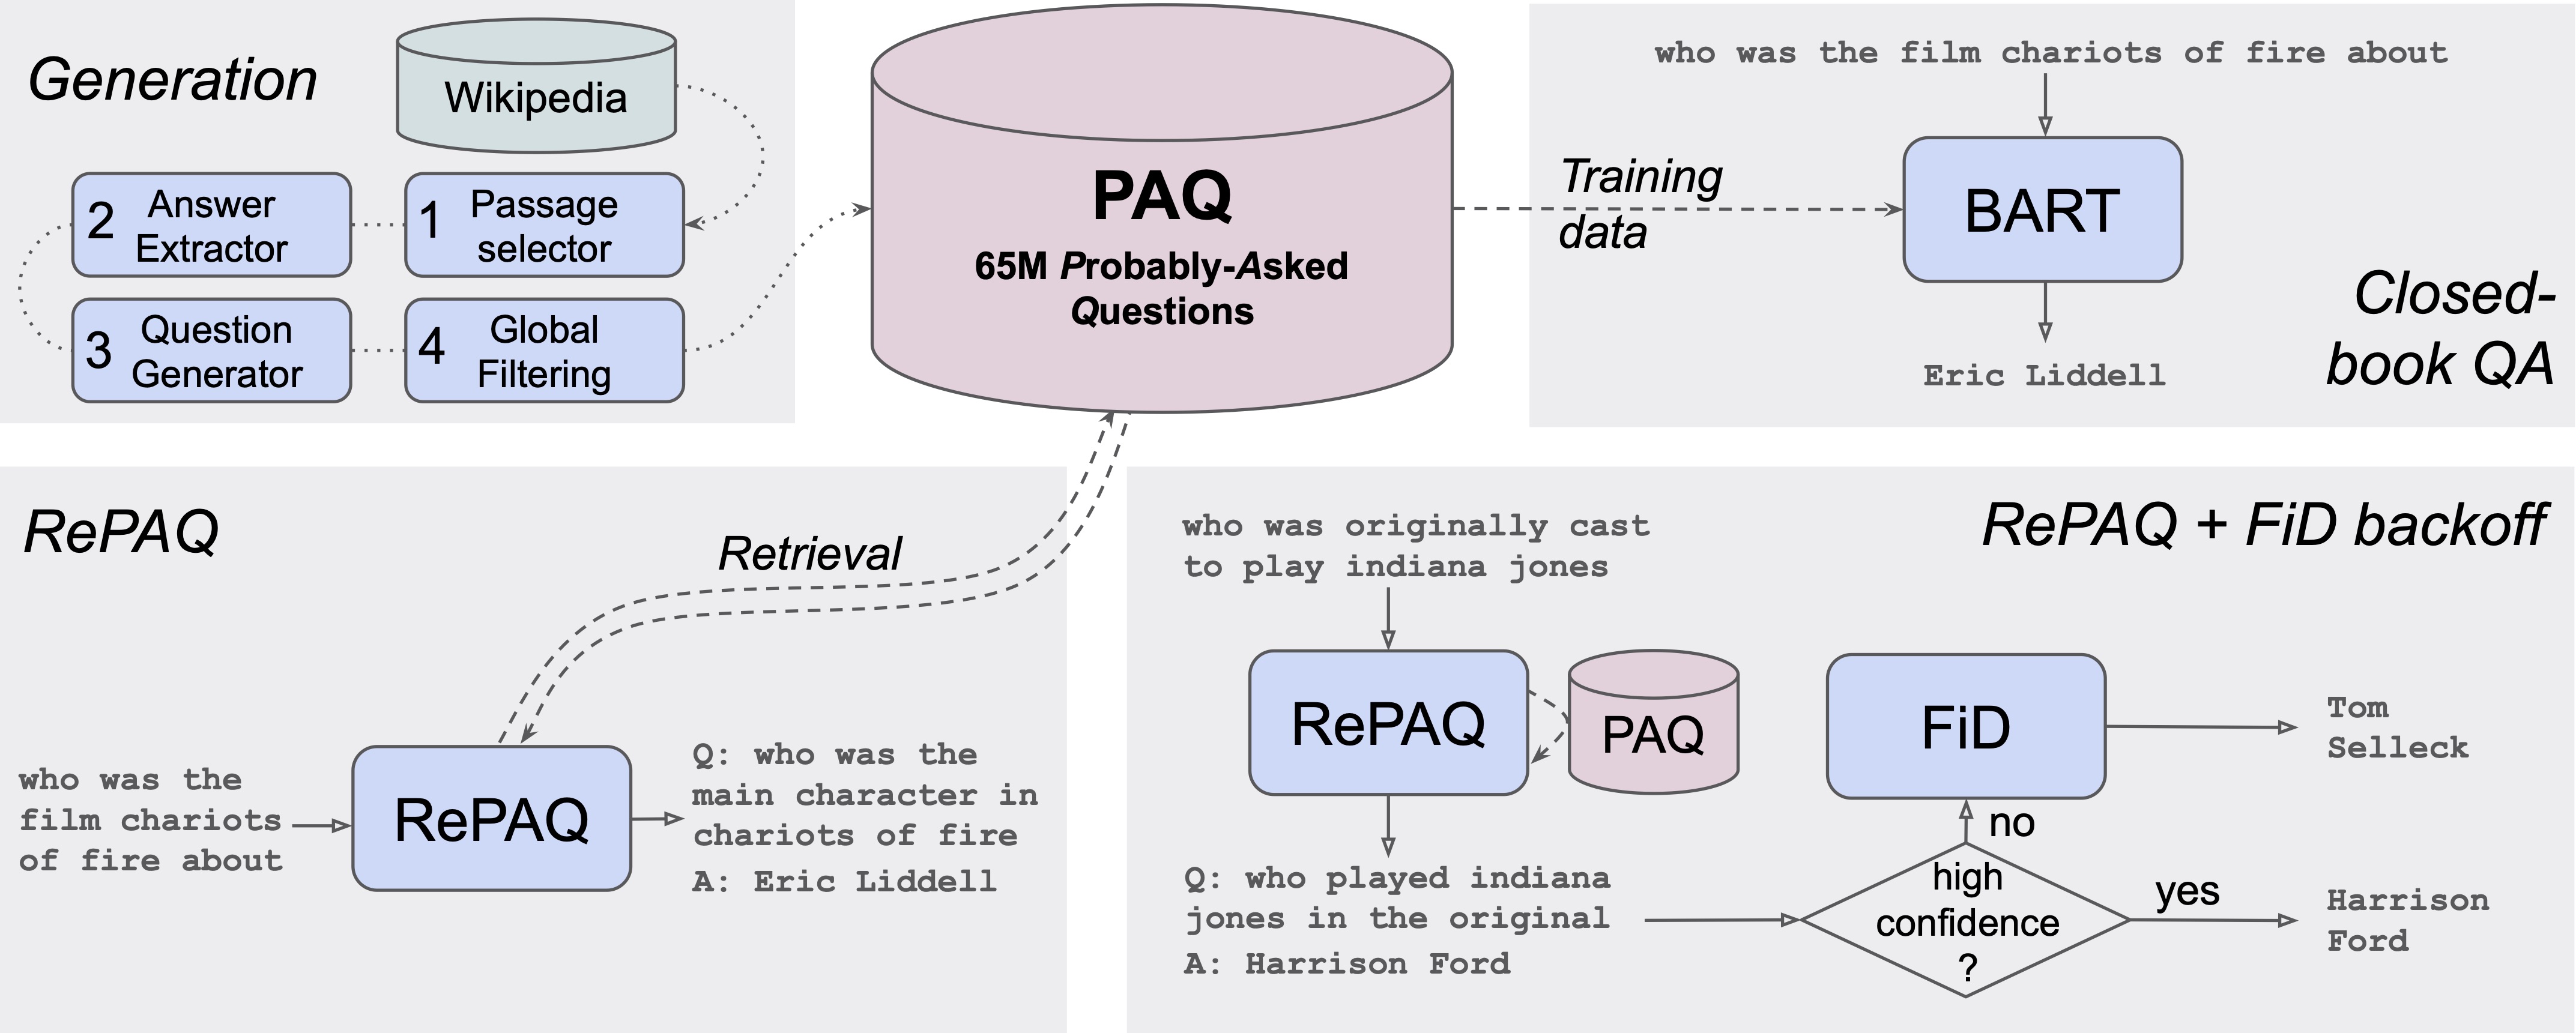 PAQ: 65 Million Probably-Asked Questions and What You Can Do With Them